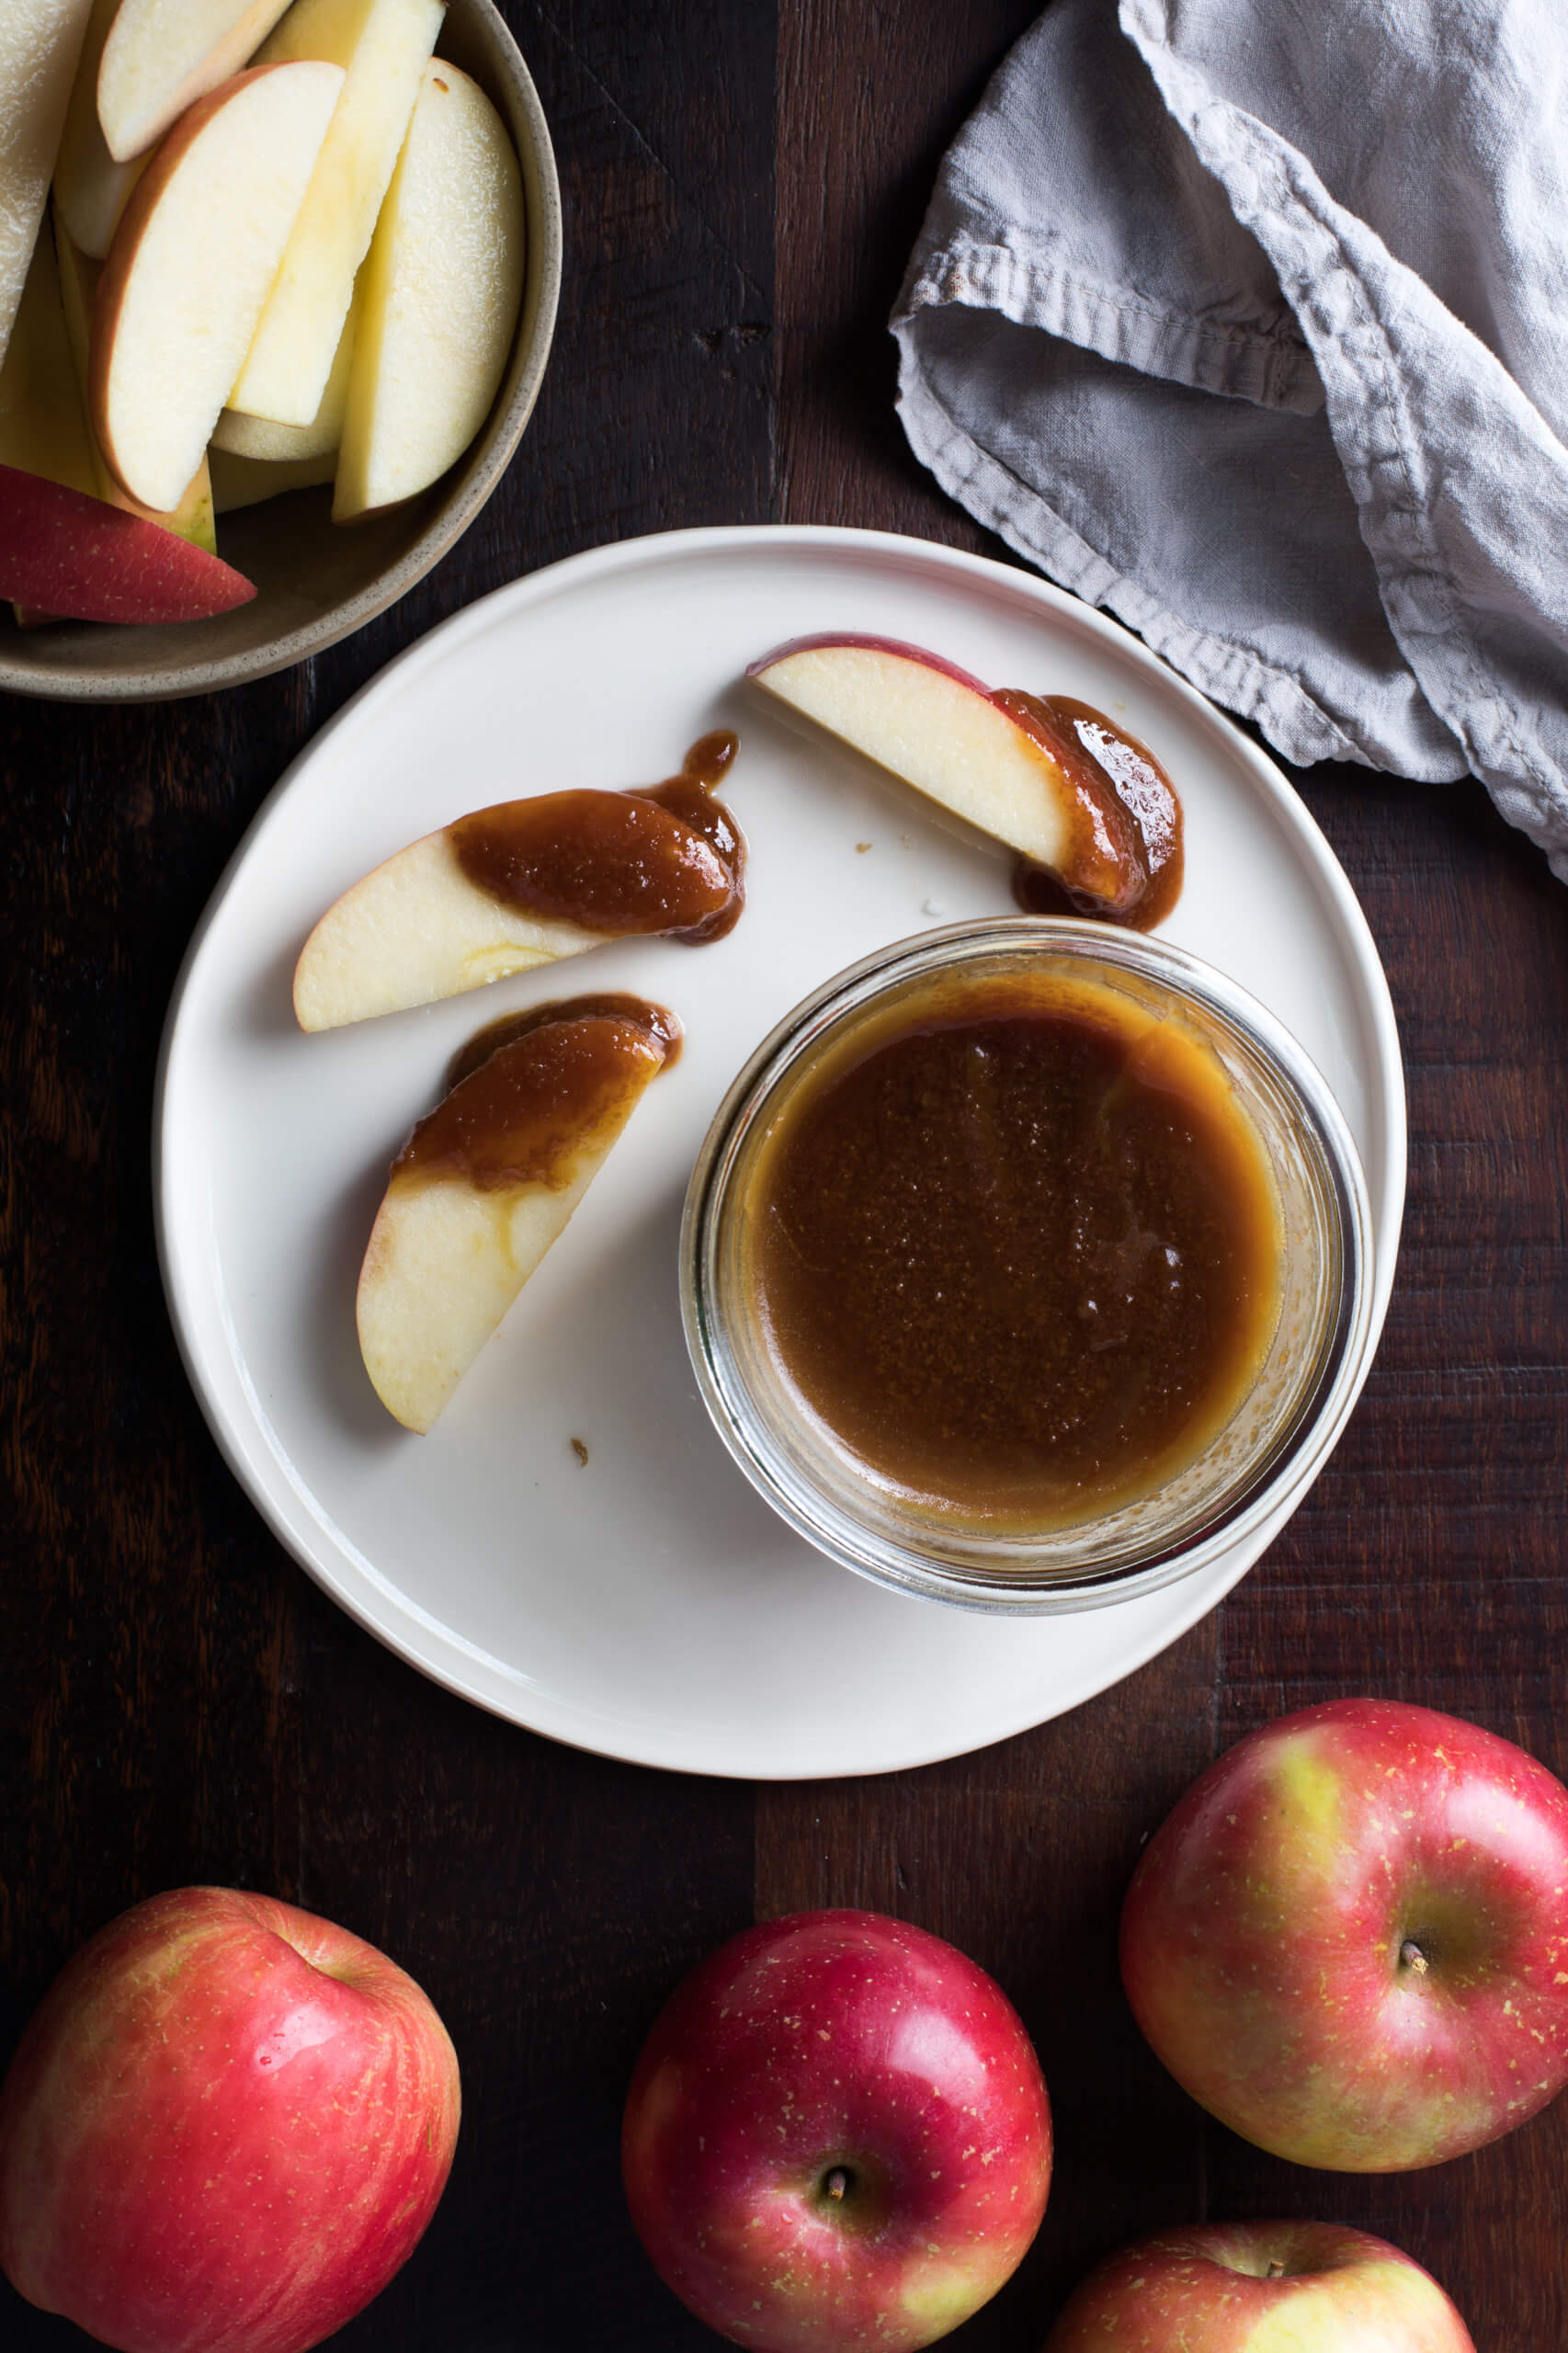 Caramel sauce on a plate for apple slices to be dipped in.